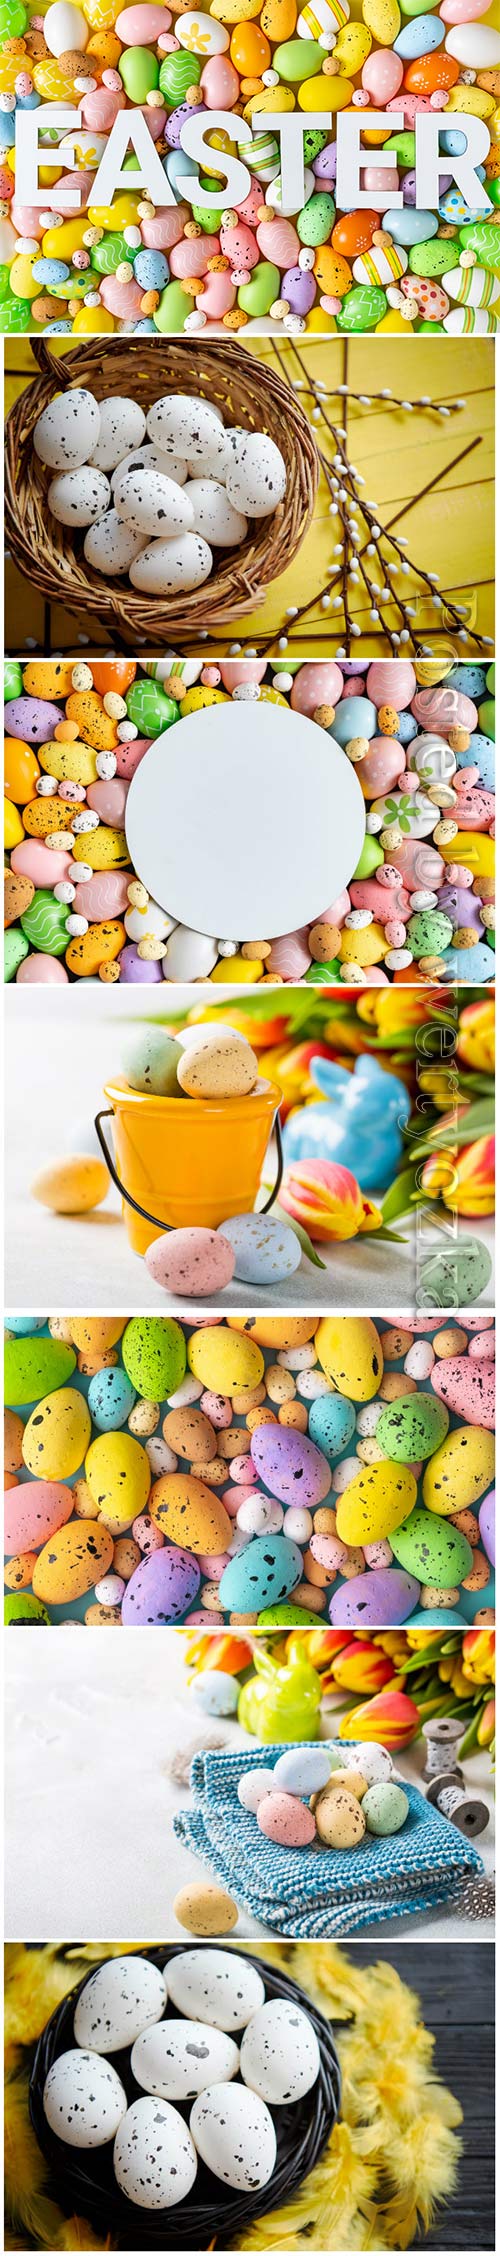 Happy Easter stock photo, Easter eggs, spring flowers # 5